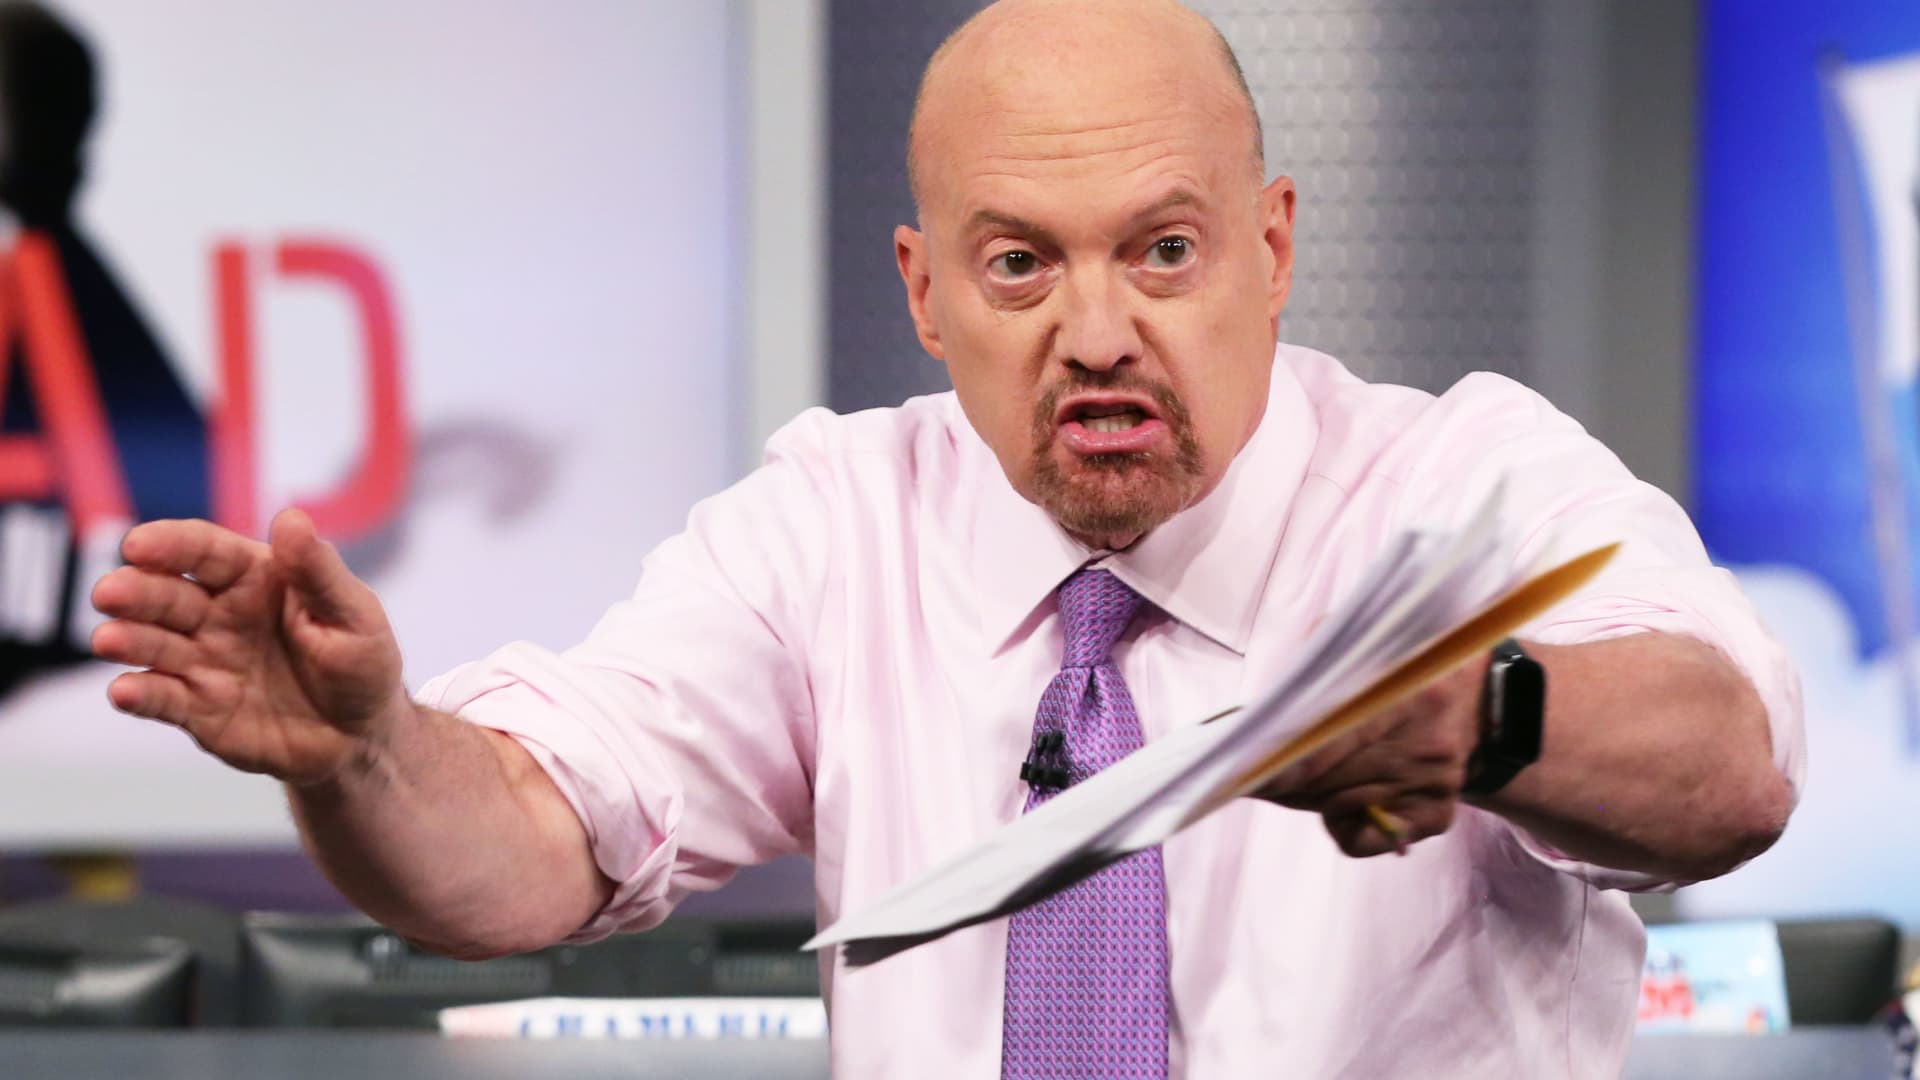 Jim Cramer: These are the 5 stocks you should buy right now